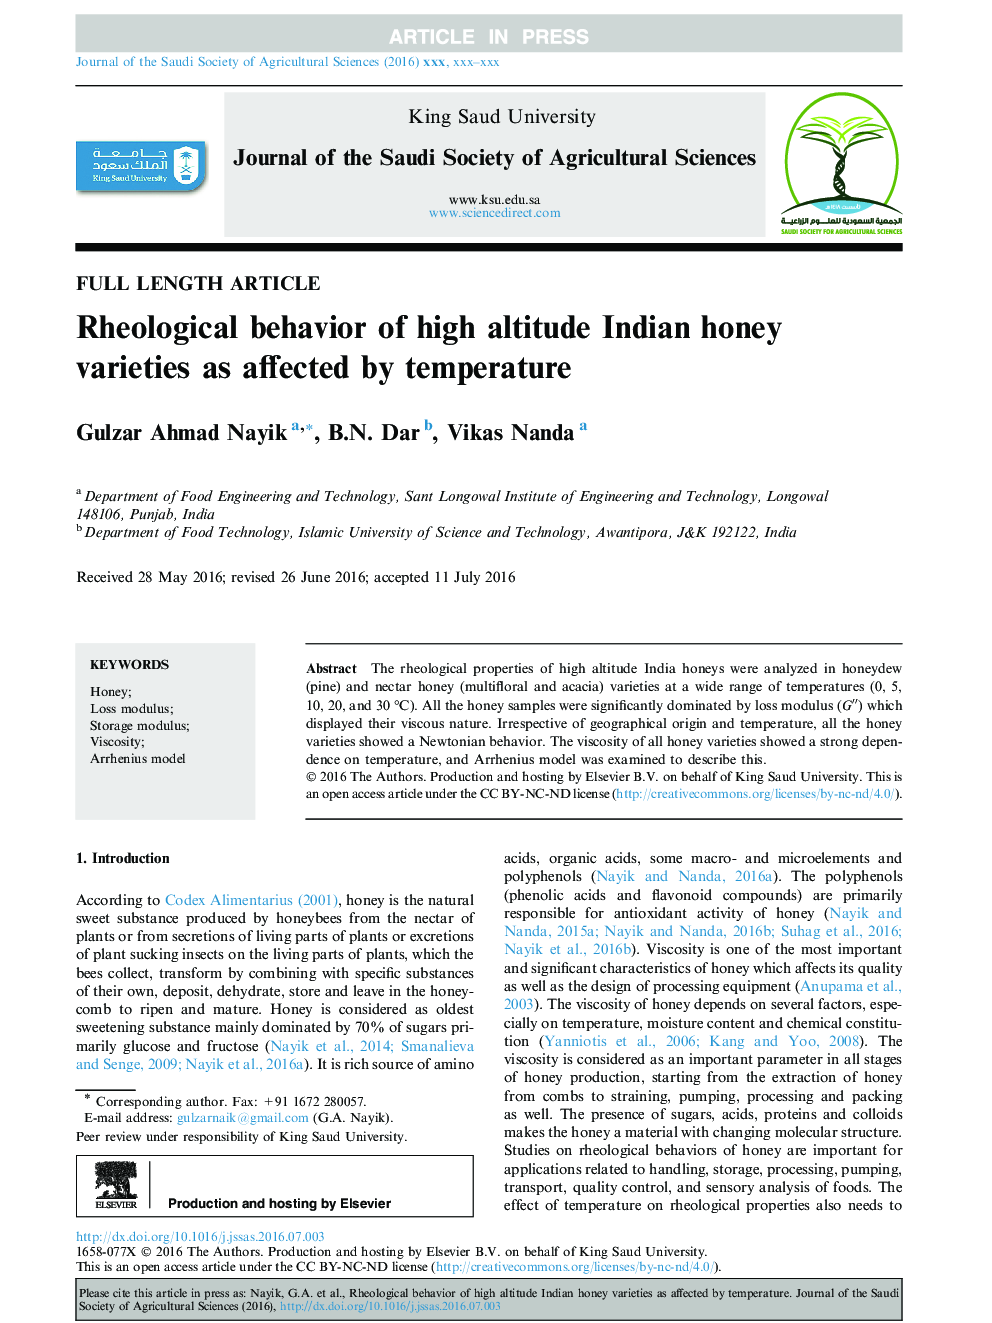 Rheological behavior of high altitude Indian honey varieties as affected by temperature